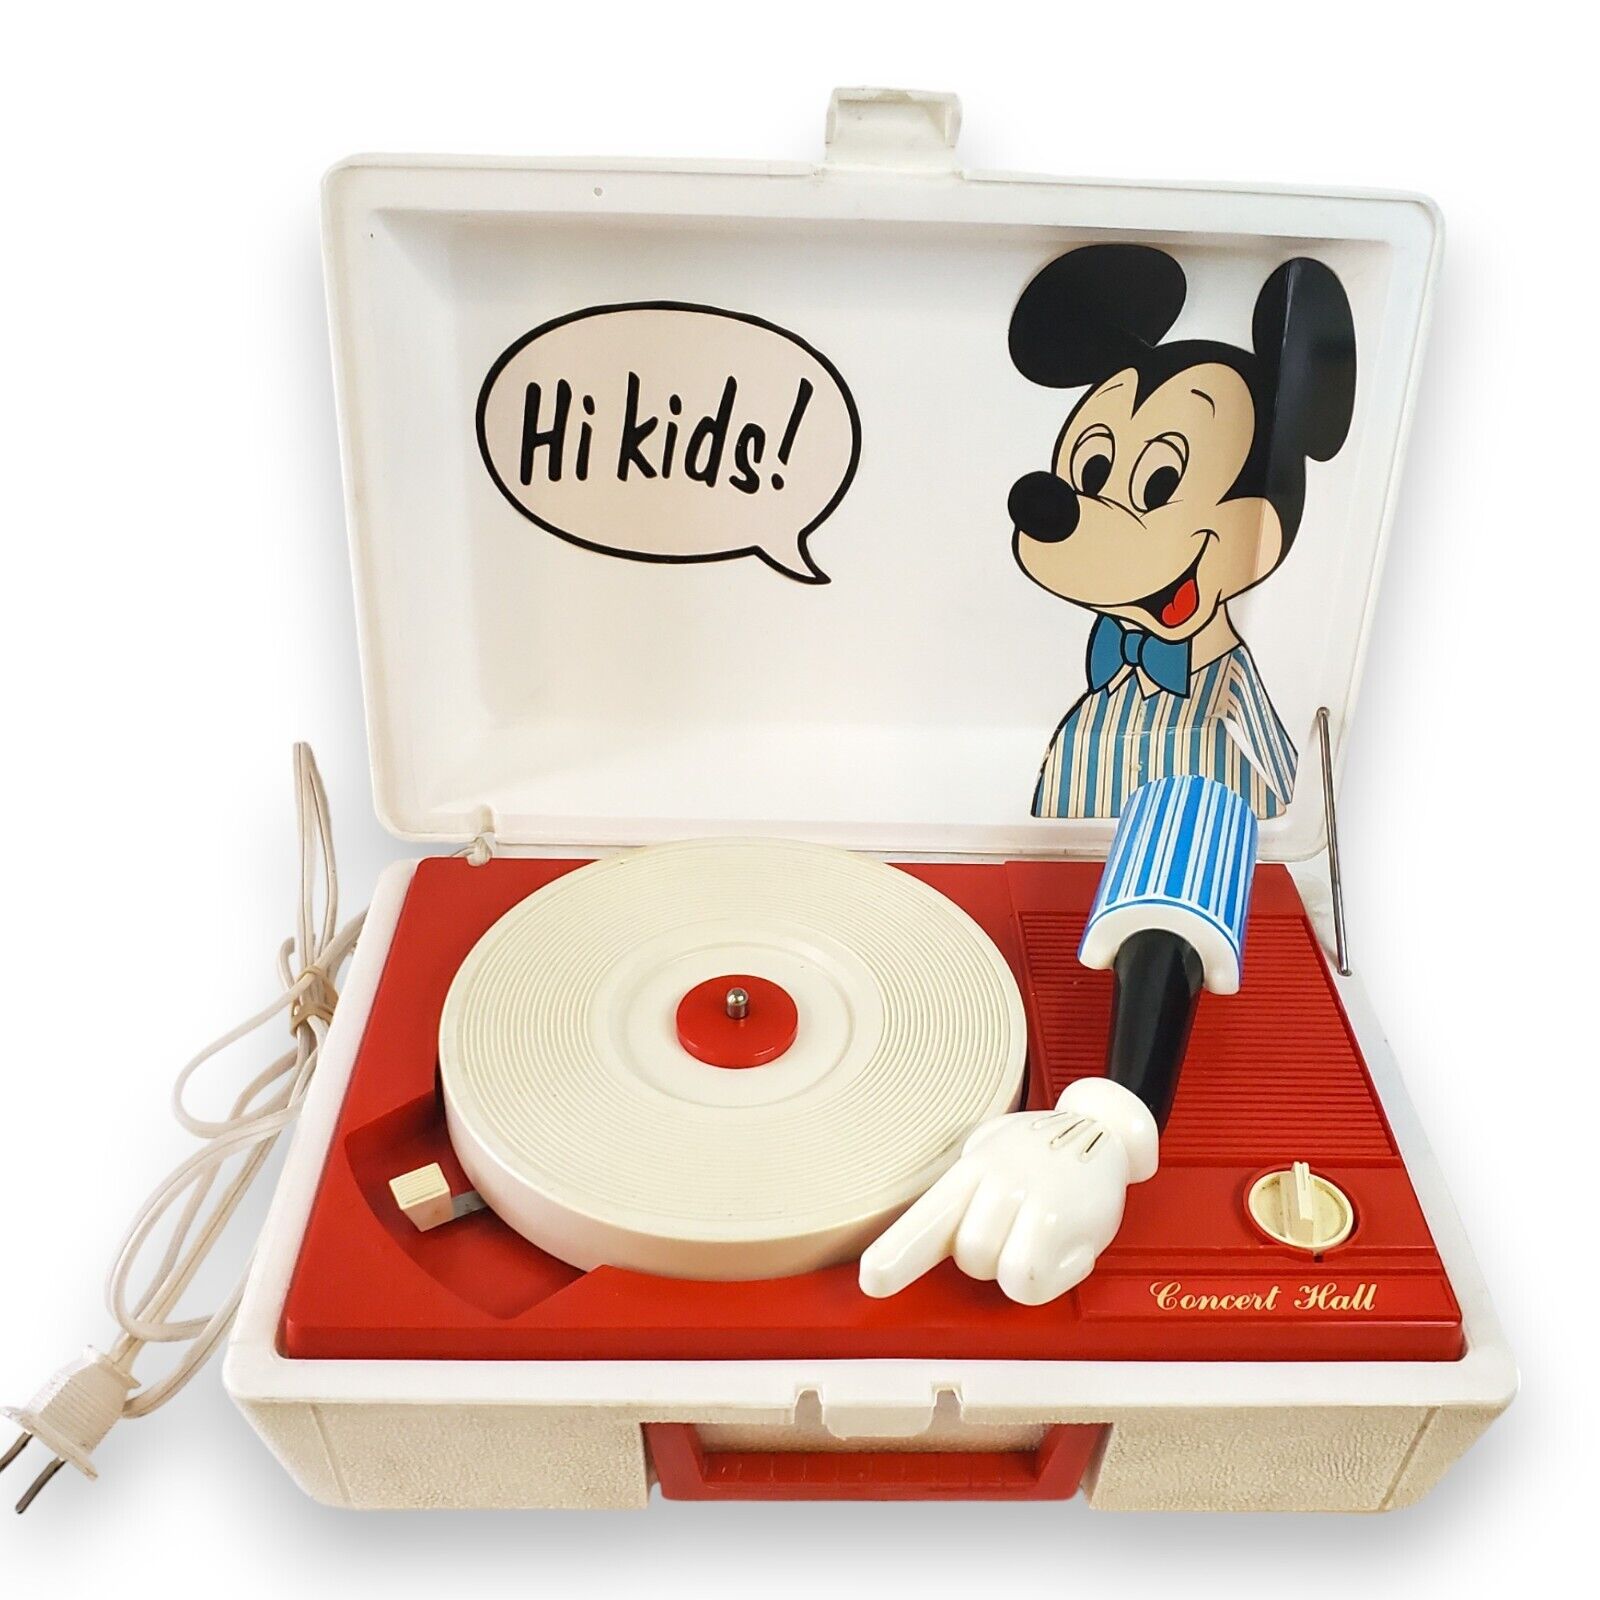 Vintage Mickey Mouse Concert Hall Record Player - Model 3122 - 1960s Collectible